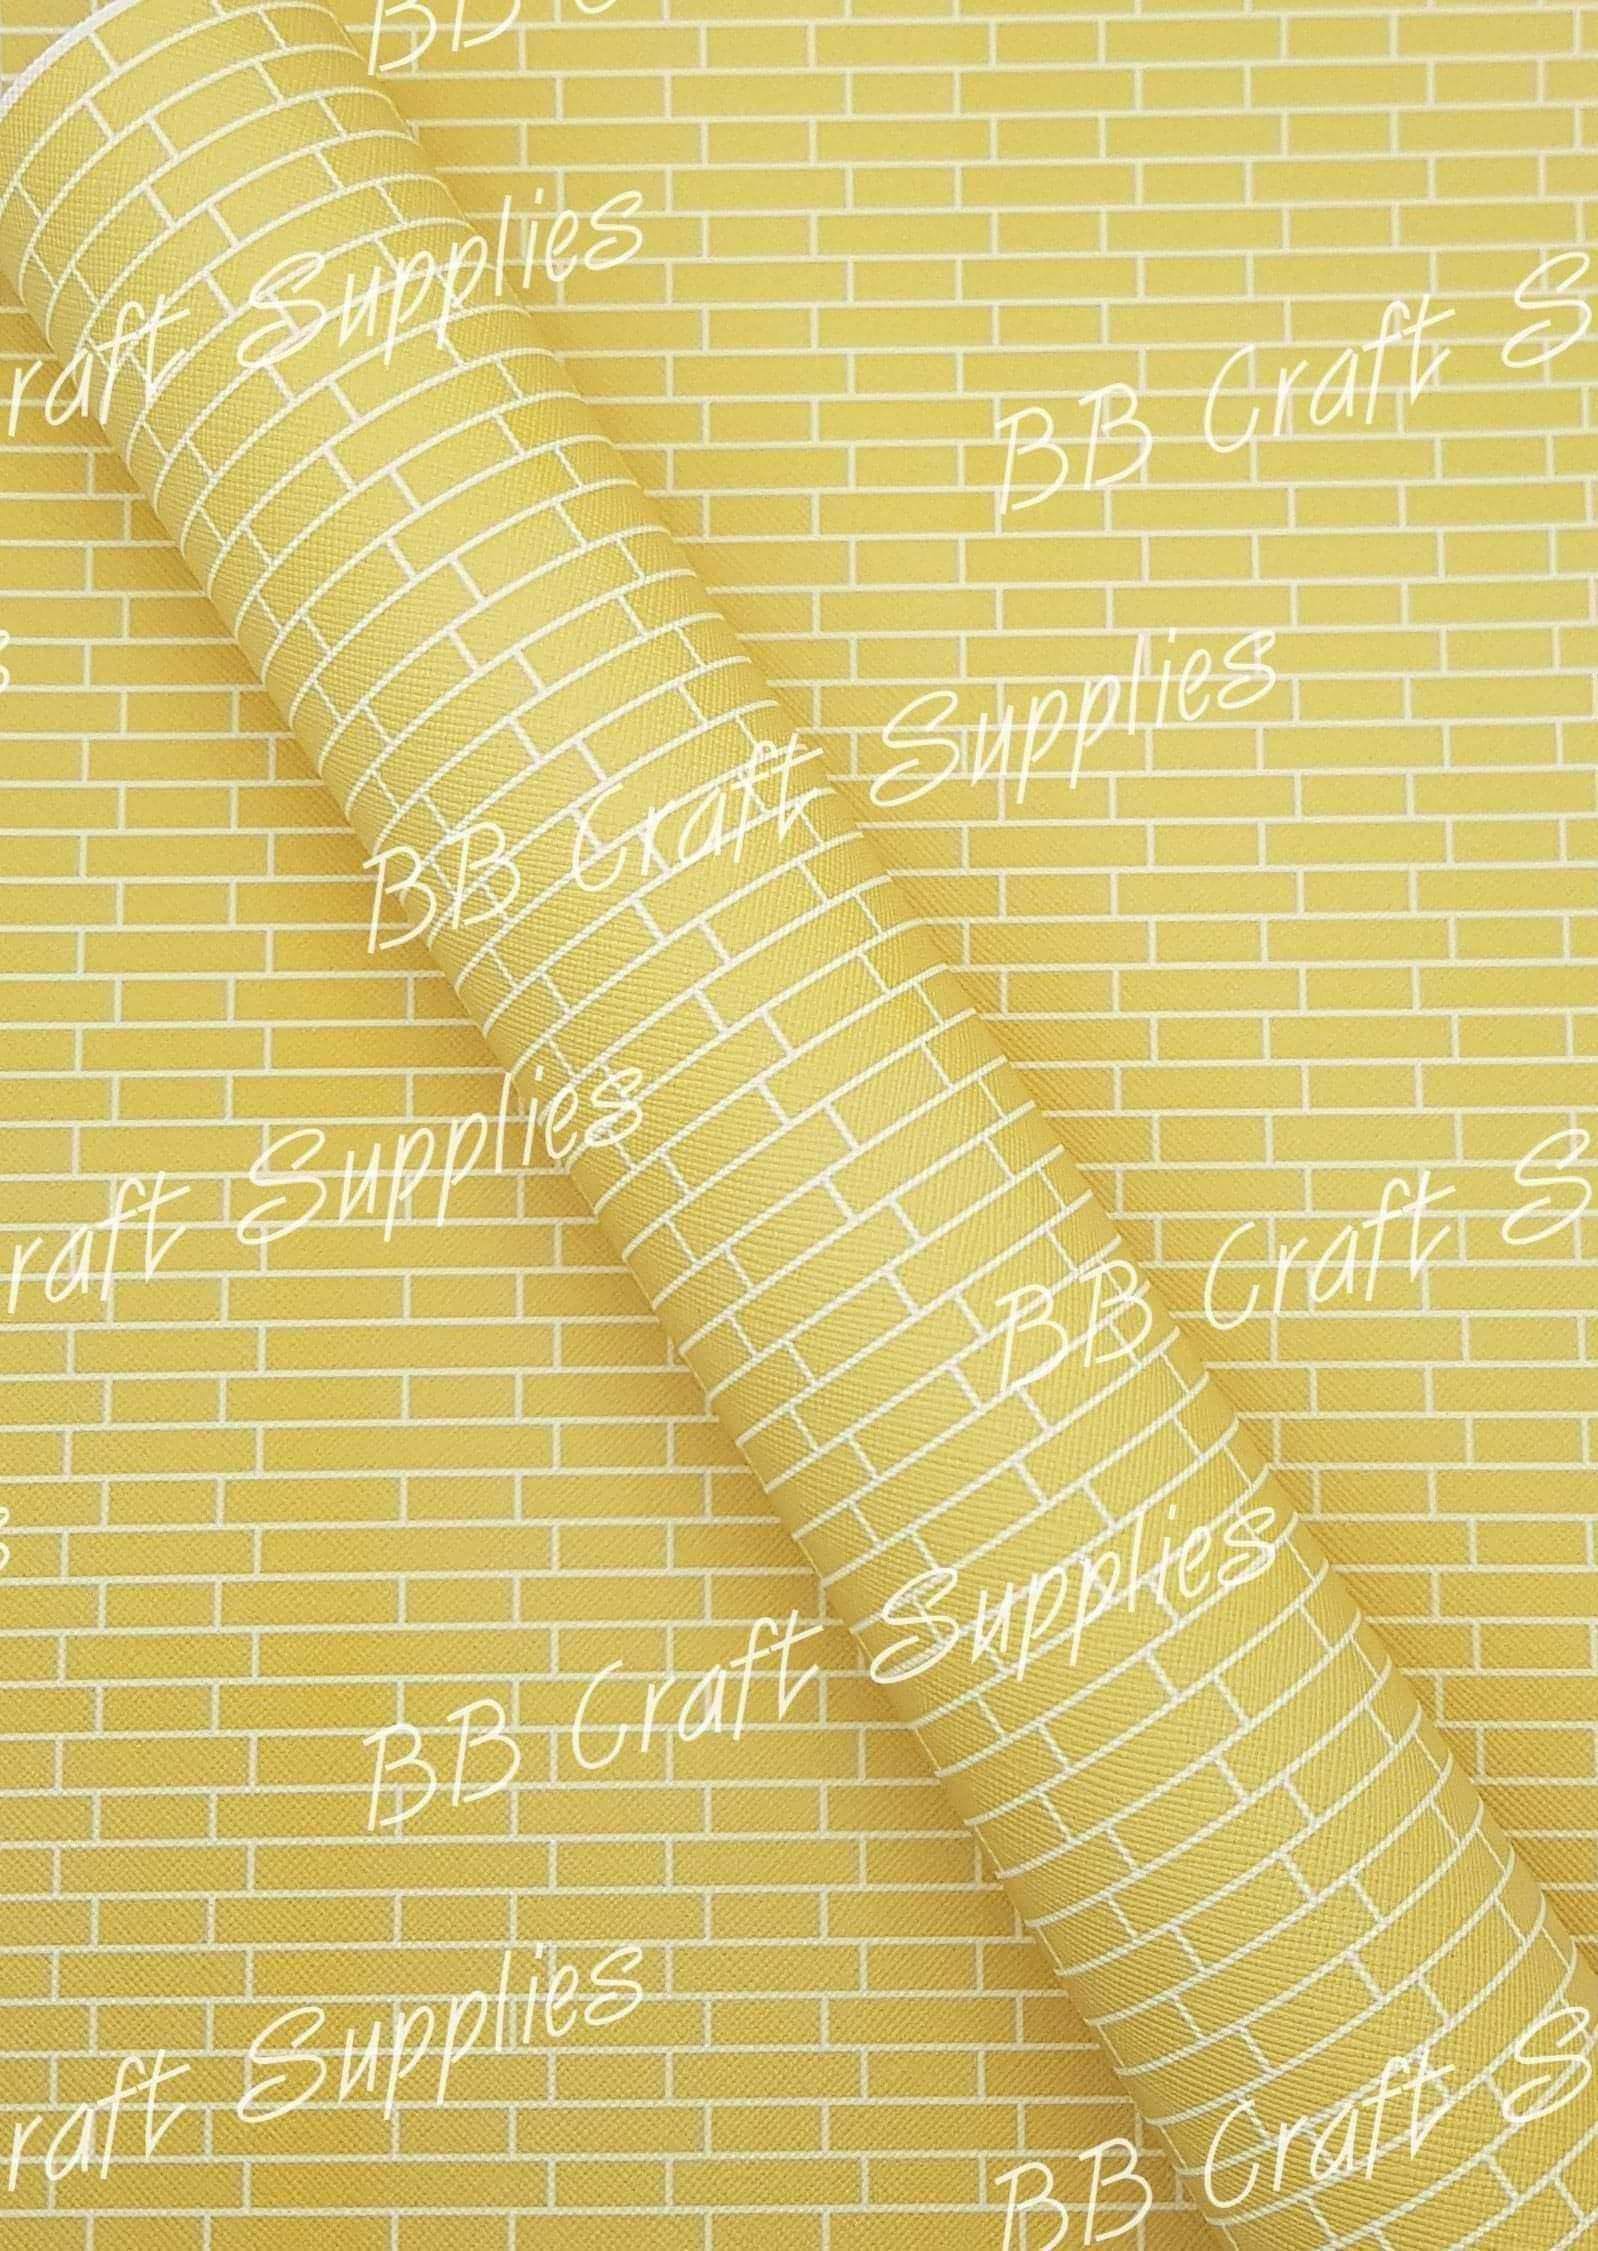 Yellow Bricks Faux Leather - Faux, Faux Leather, Leather, leatherette, oz, pattern, wizard of oz, wizzard of oz, yellow brick road - Bare Butler Faux Leather Supplies 